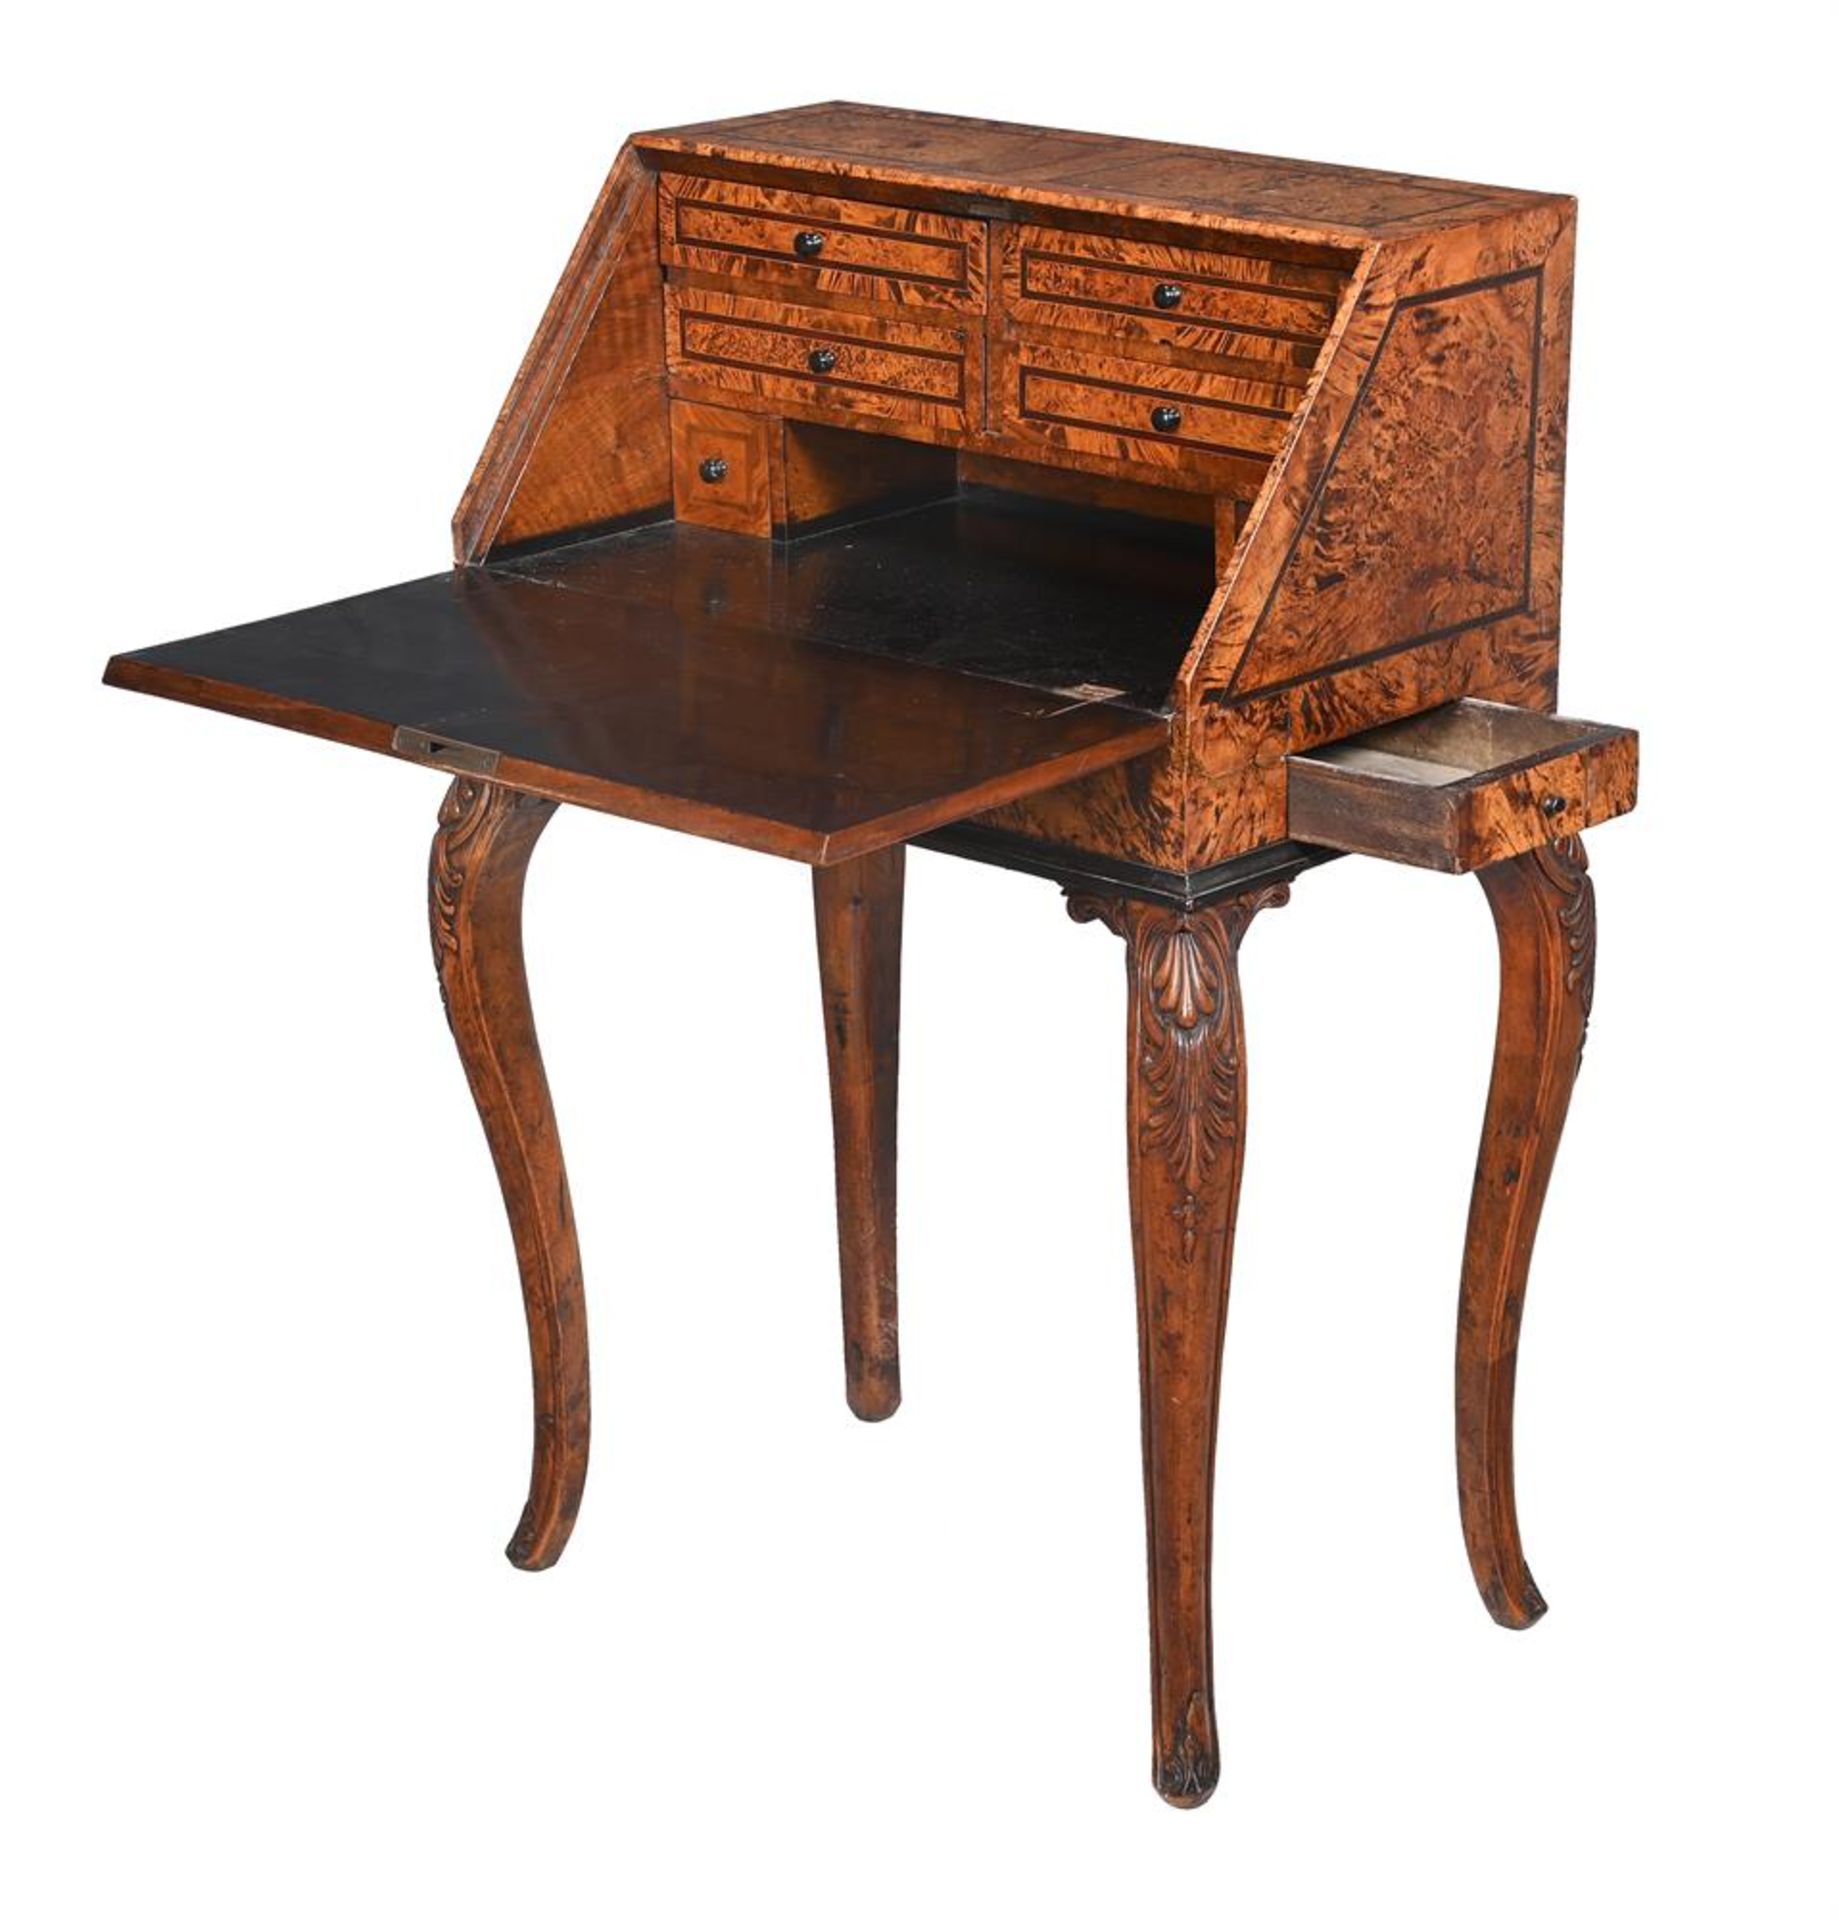 A MULBERRY BUREAU ON STAND - Image 2 of 2